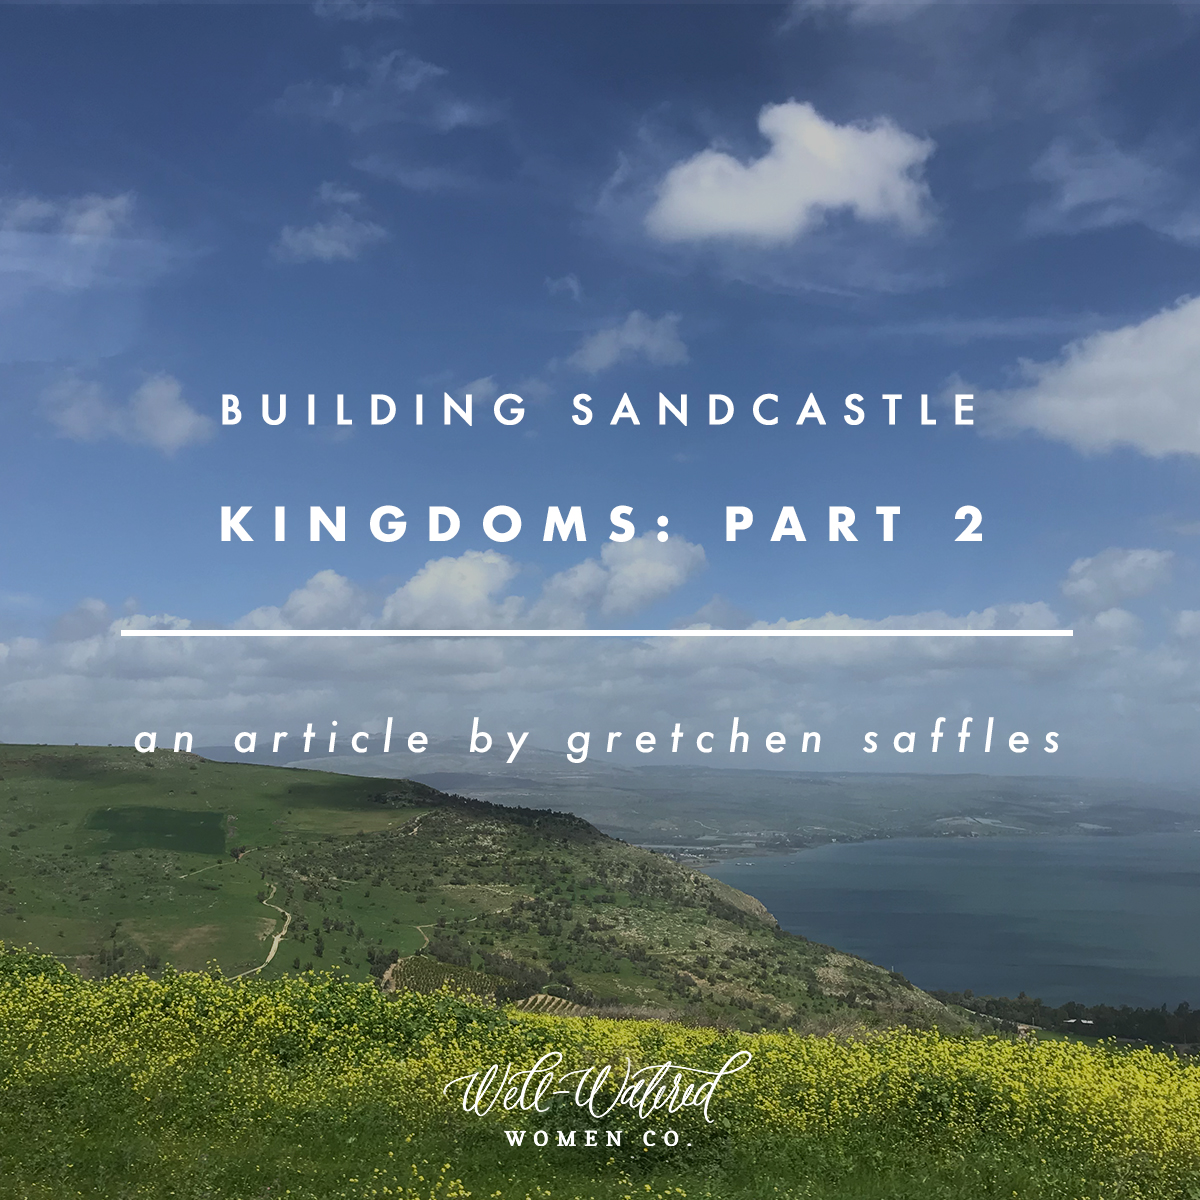 Building Sandcastle Kingdoms Part 2 | Well-Watered Women Articles